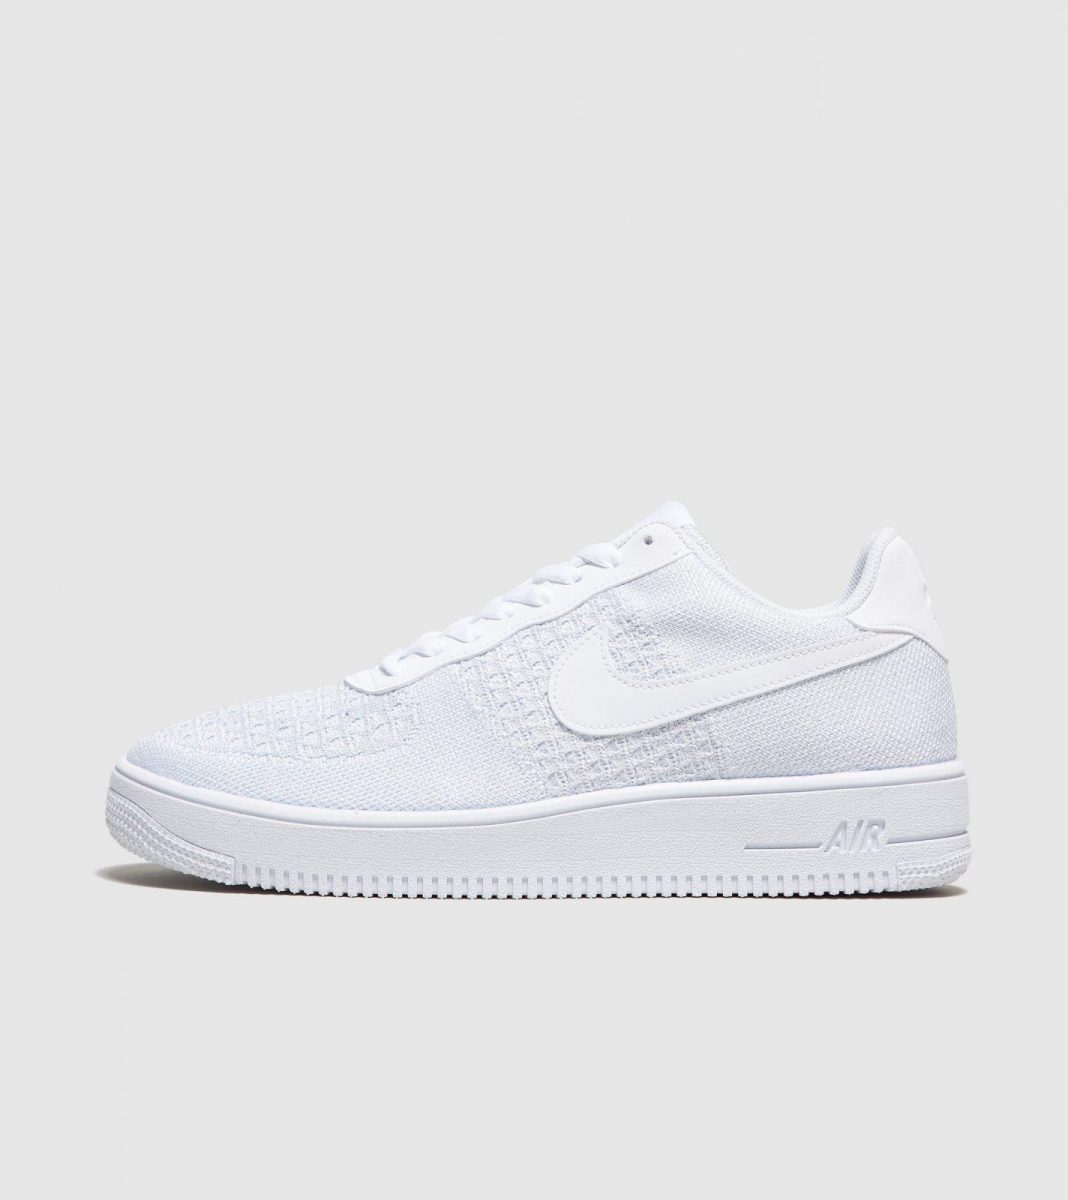 nike air force 1 flyknit 2.0 $110